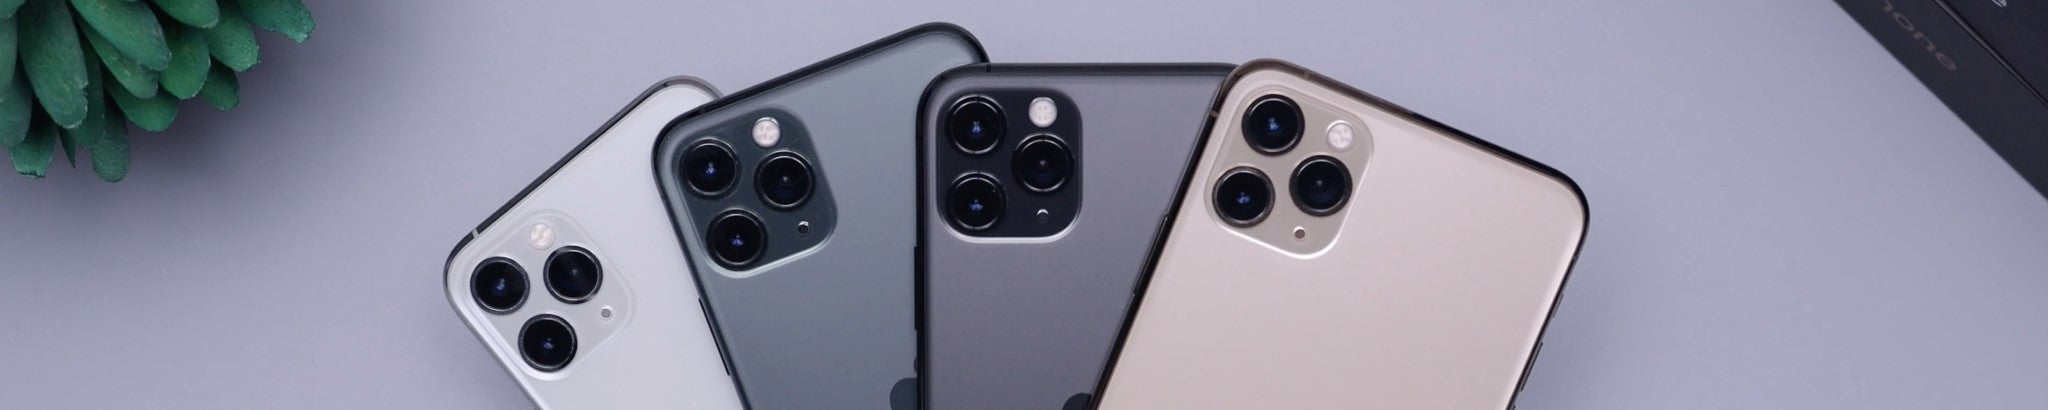 ‘Secret button’ on the back of your iPhone goes viral on TikTok